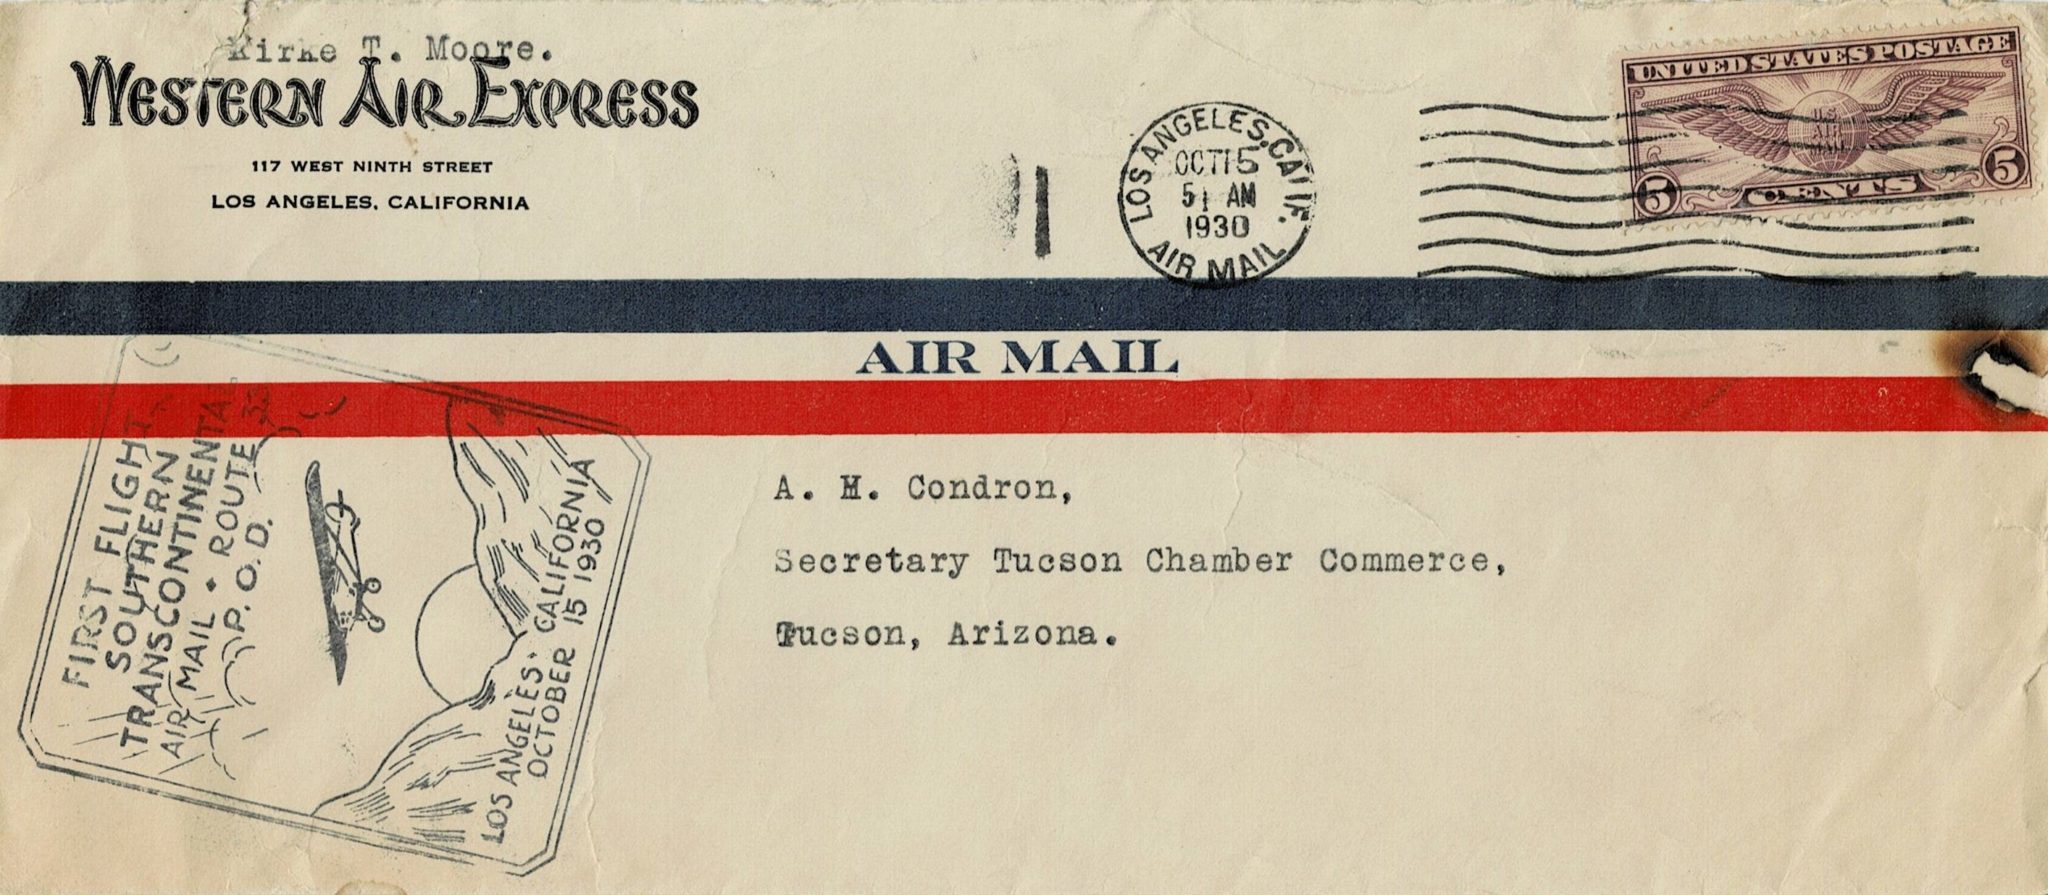 Western Air Express First Flight Southern Transcontinental Air Mail October 15, 1930 First Day Cover